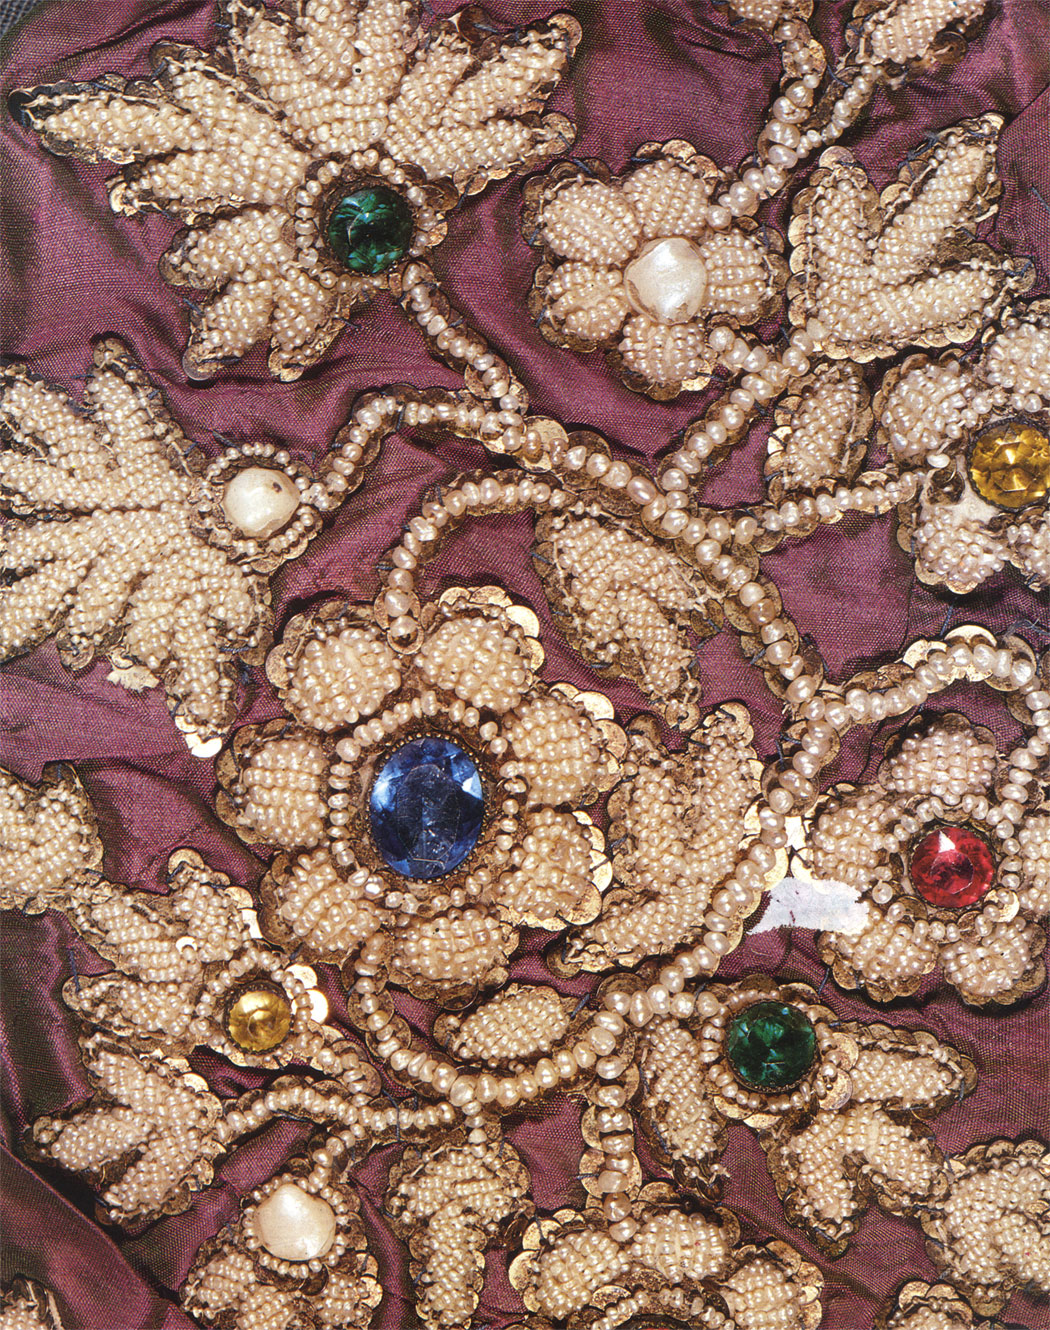 Embroidery worked in river pearls, spangles, mother-of-pearls, glass sockets, plates